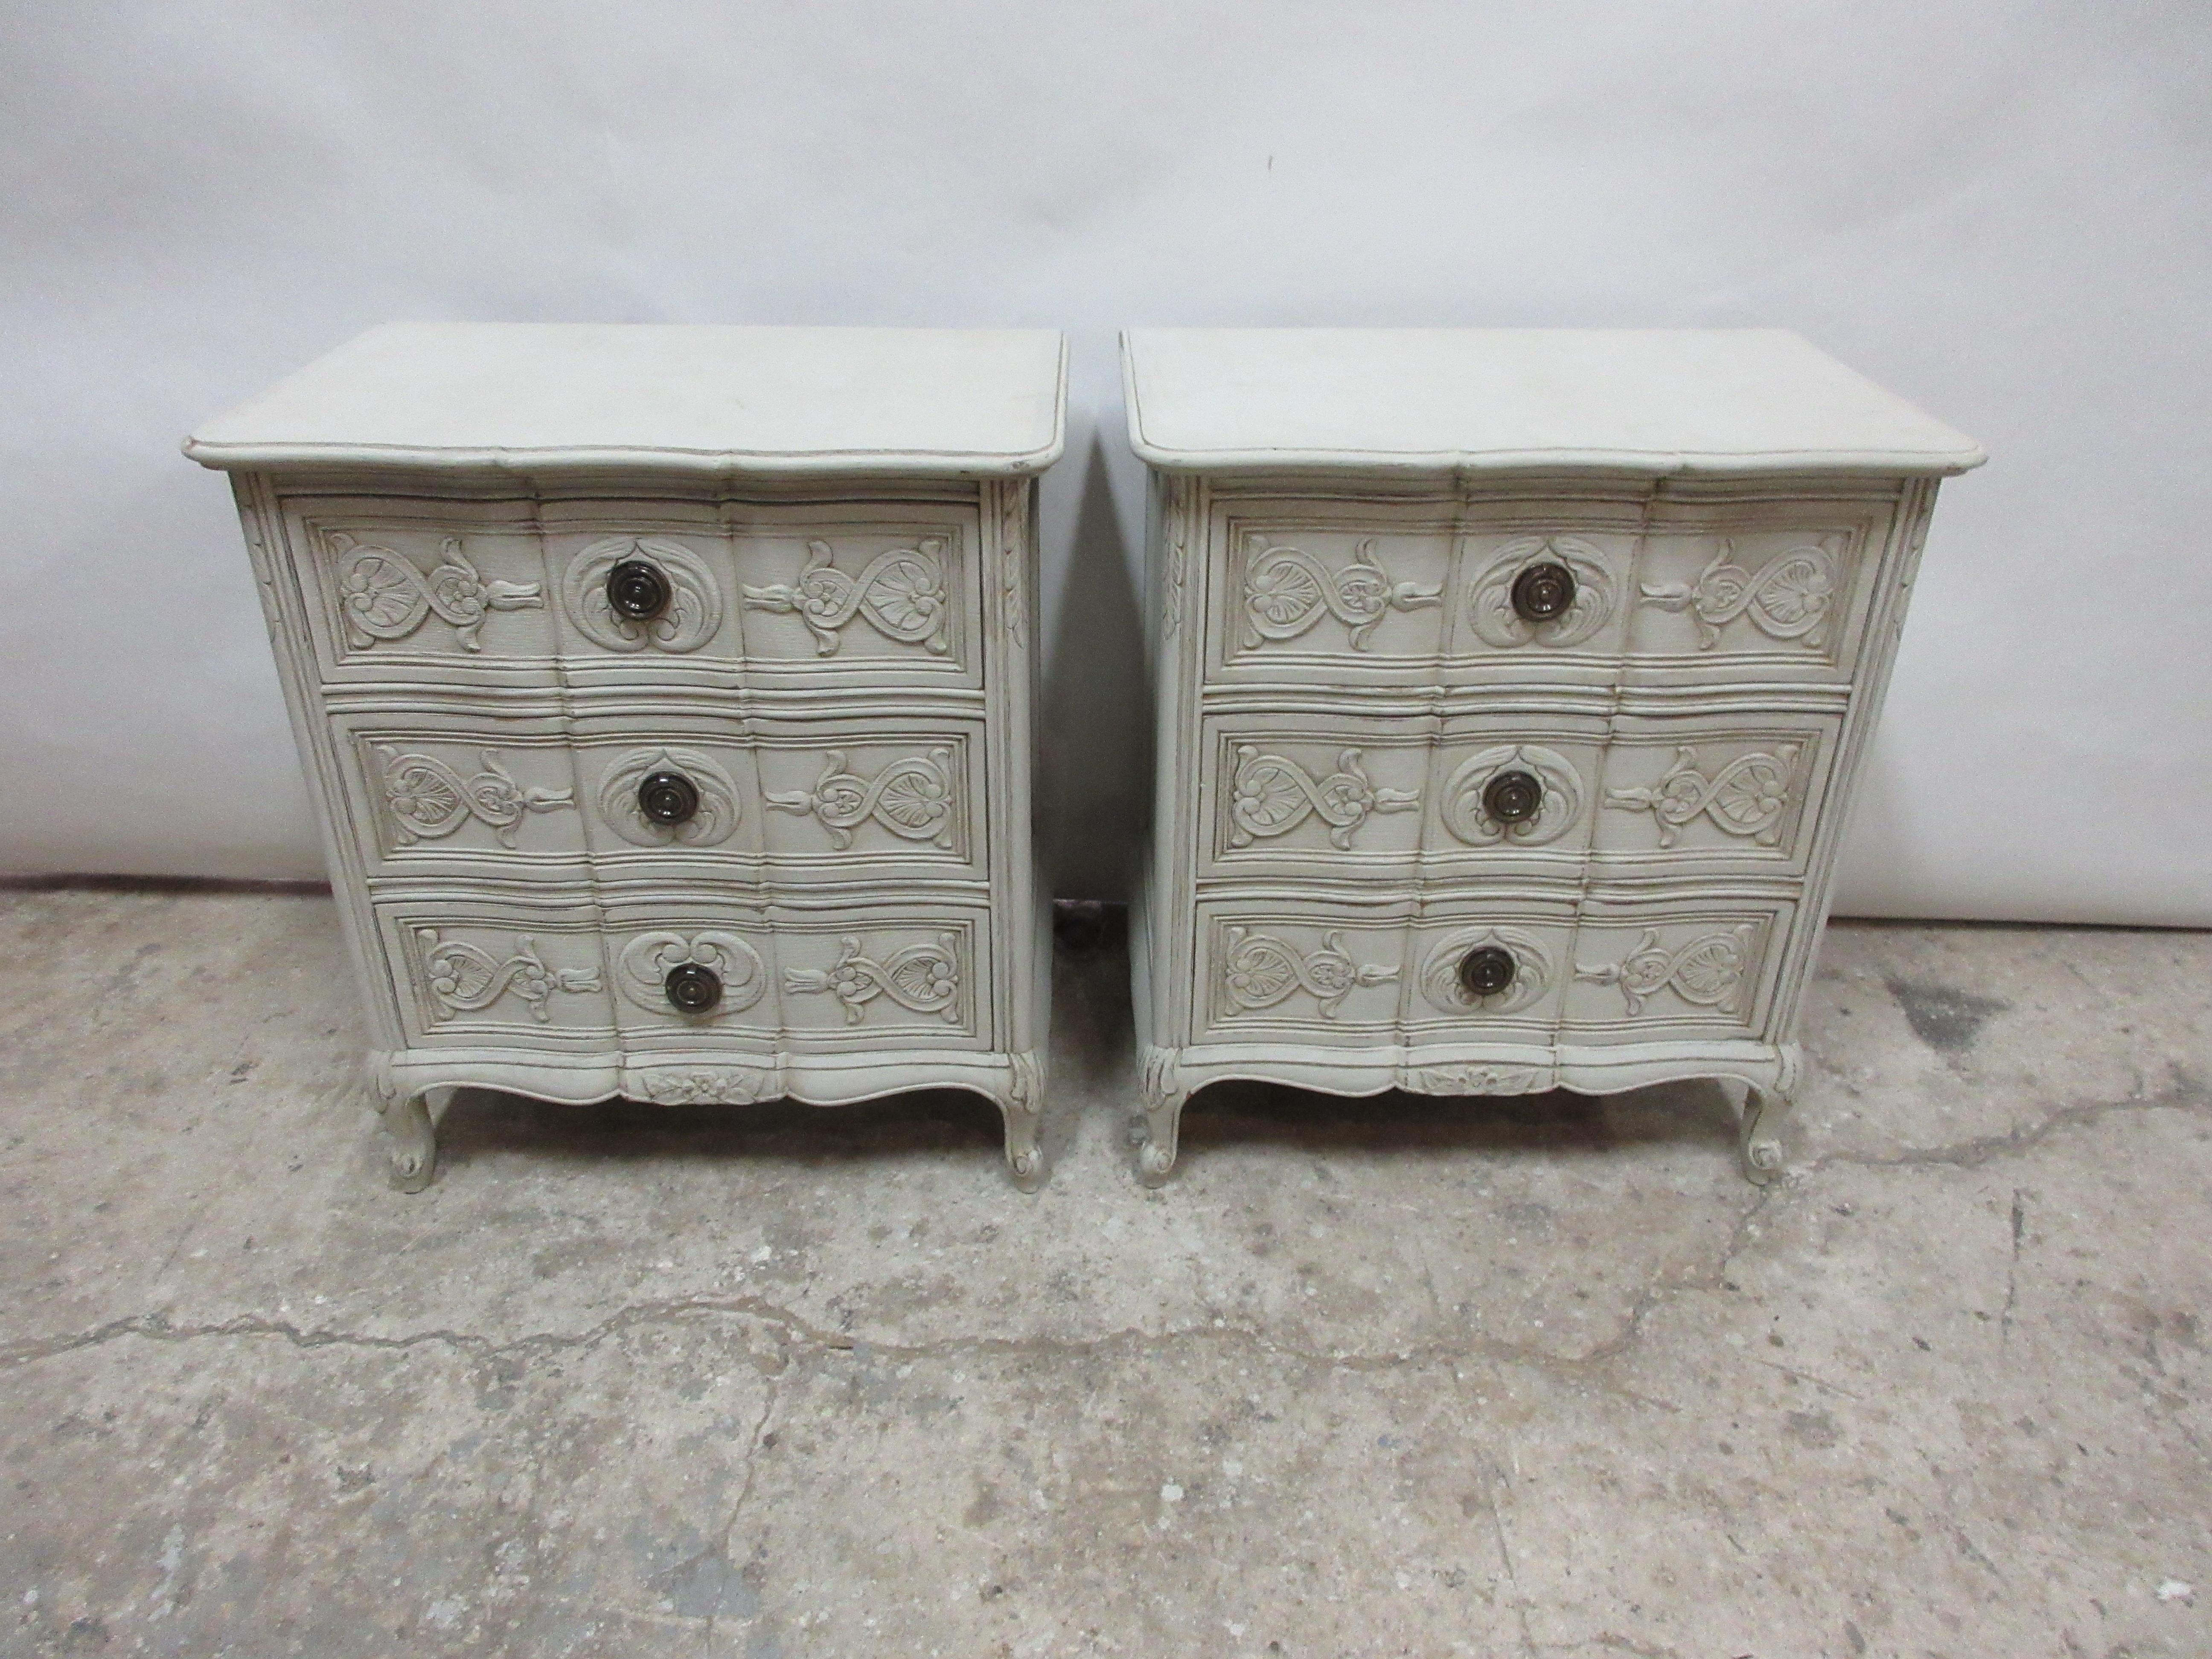 This is a set of 2 Swedish carved Rococo style nightstands. They have been restored and repainted with milk paints 